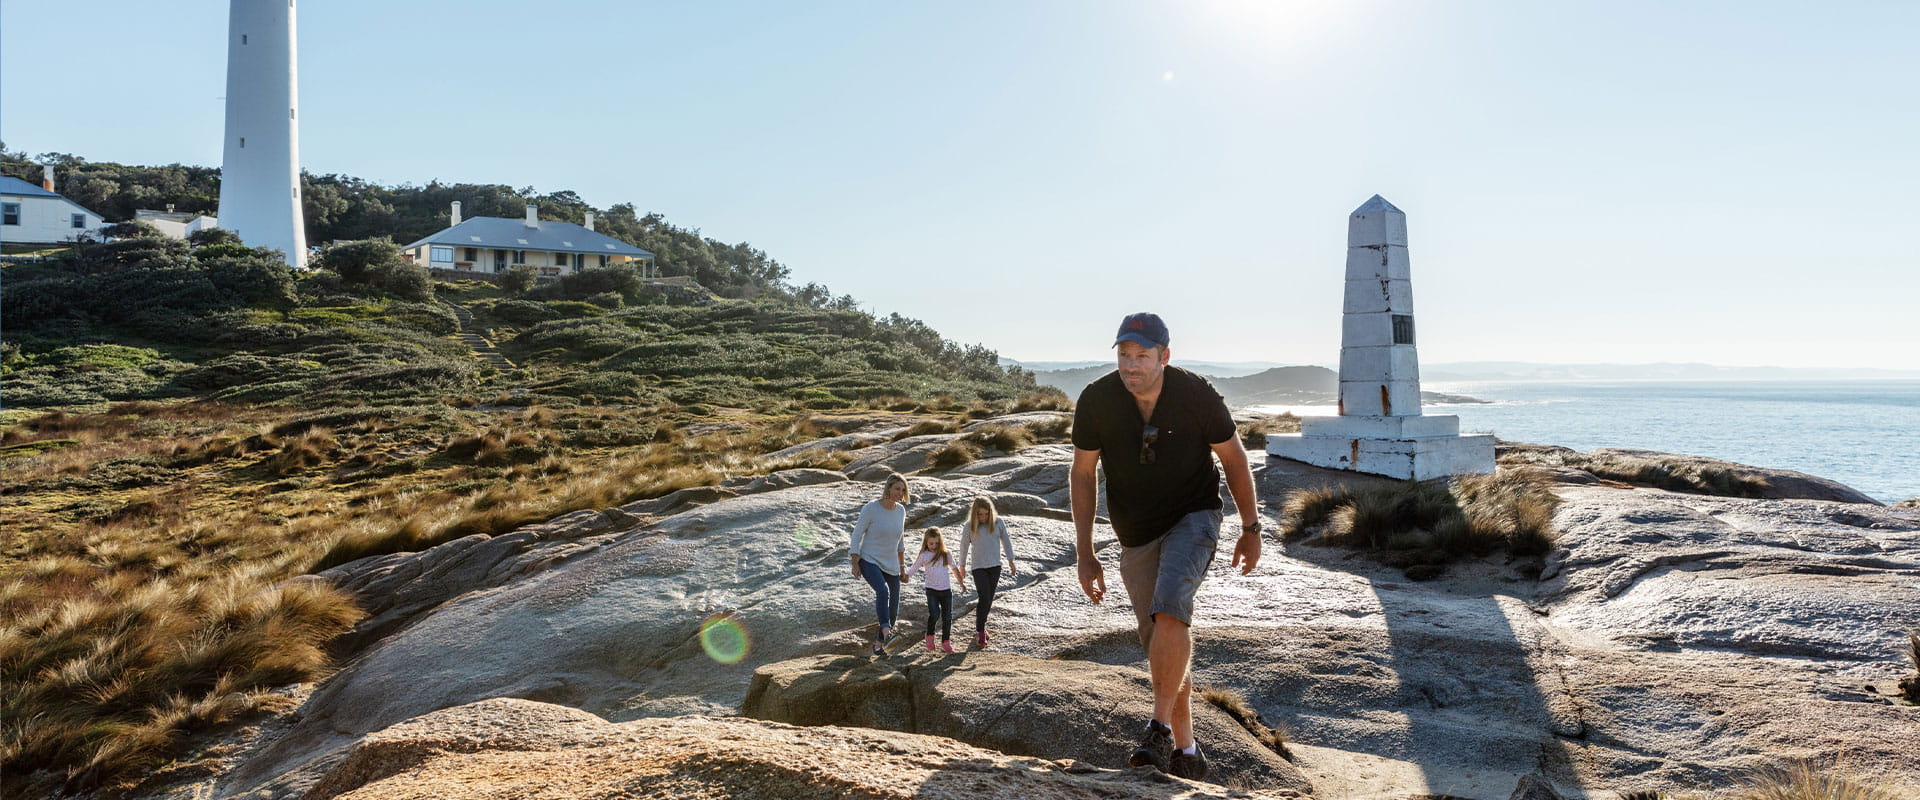 A father walks over rock slabs with his young family in the background in front of a memorial statue and lightstation in the background